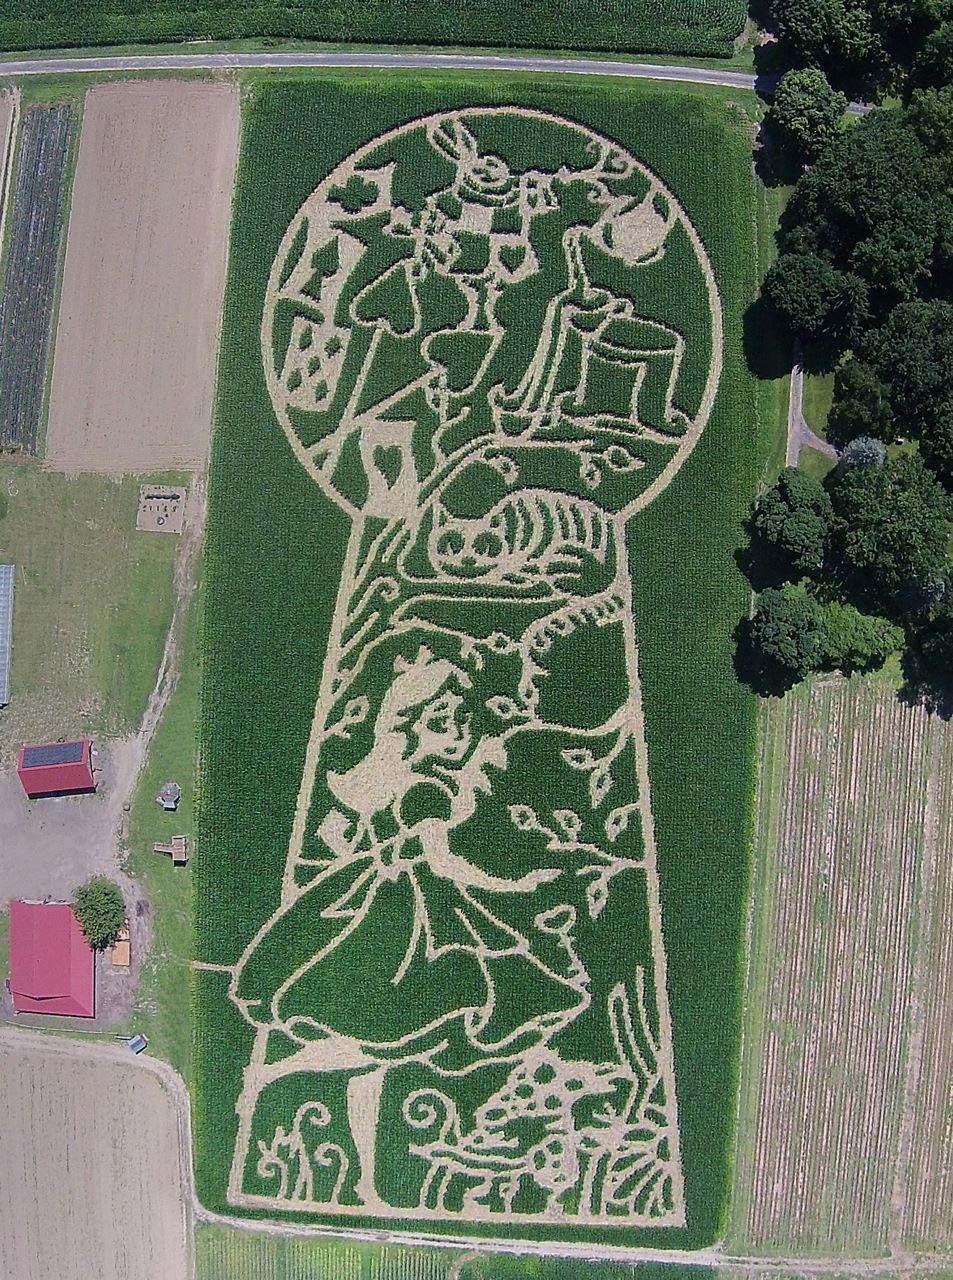 Aerial+photograph+of+an+Alice+in+Wonderland+themed+corn+maze